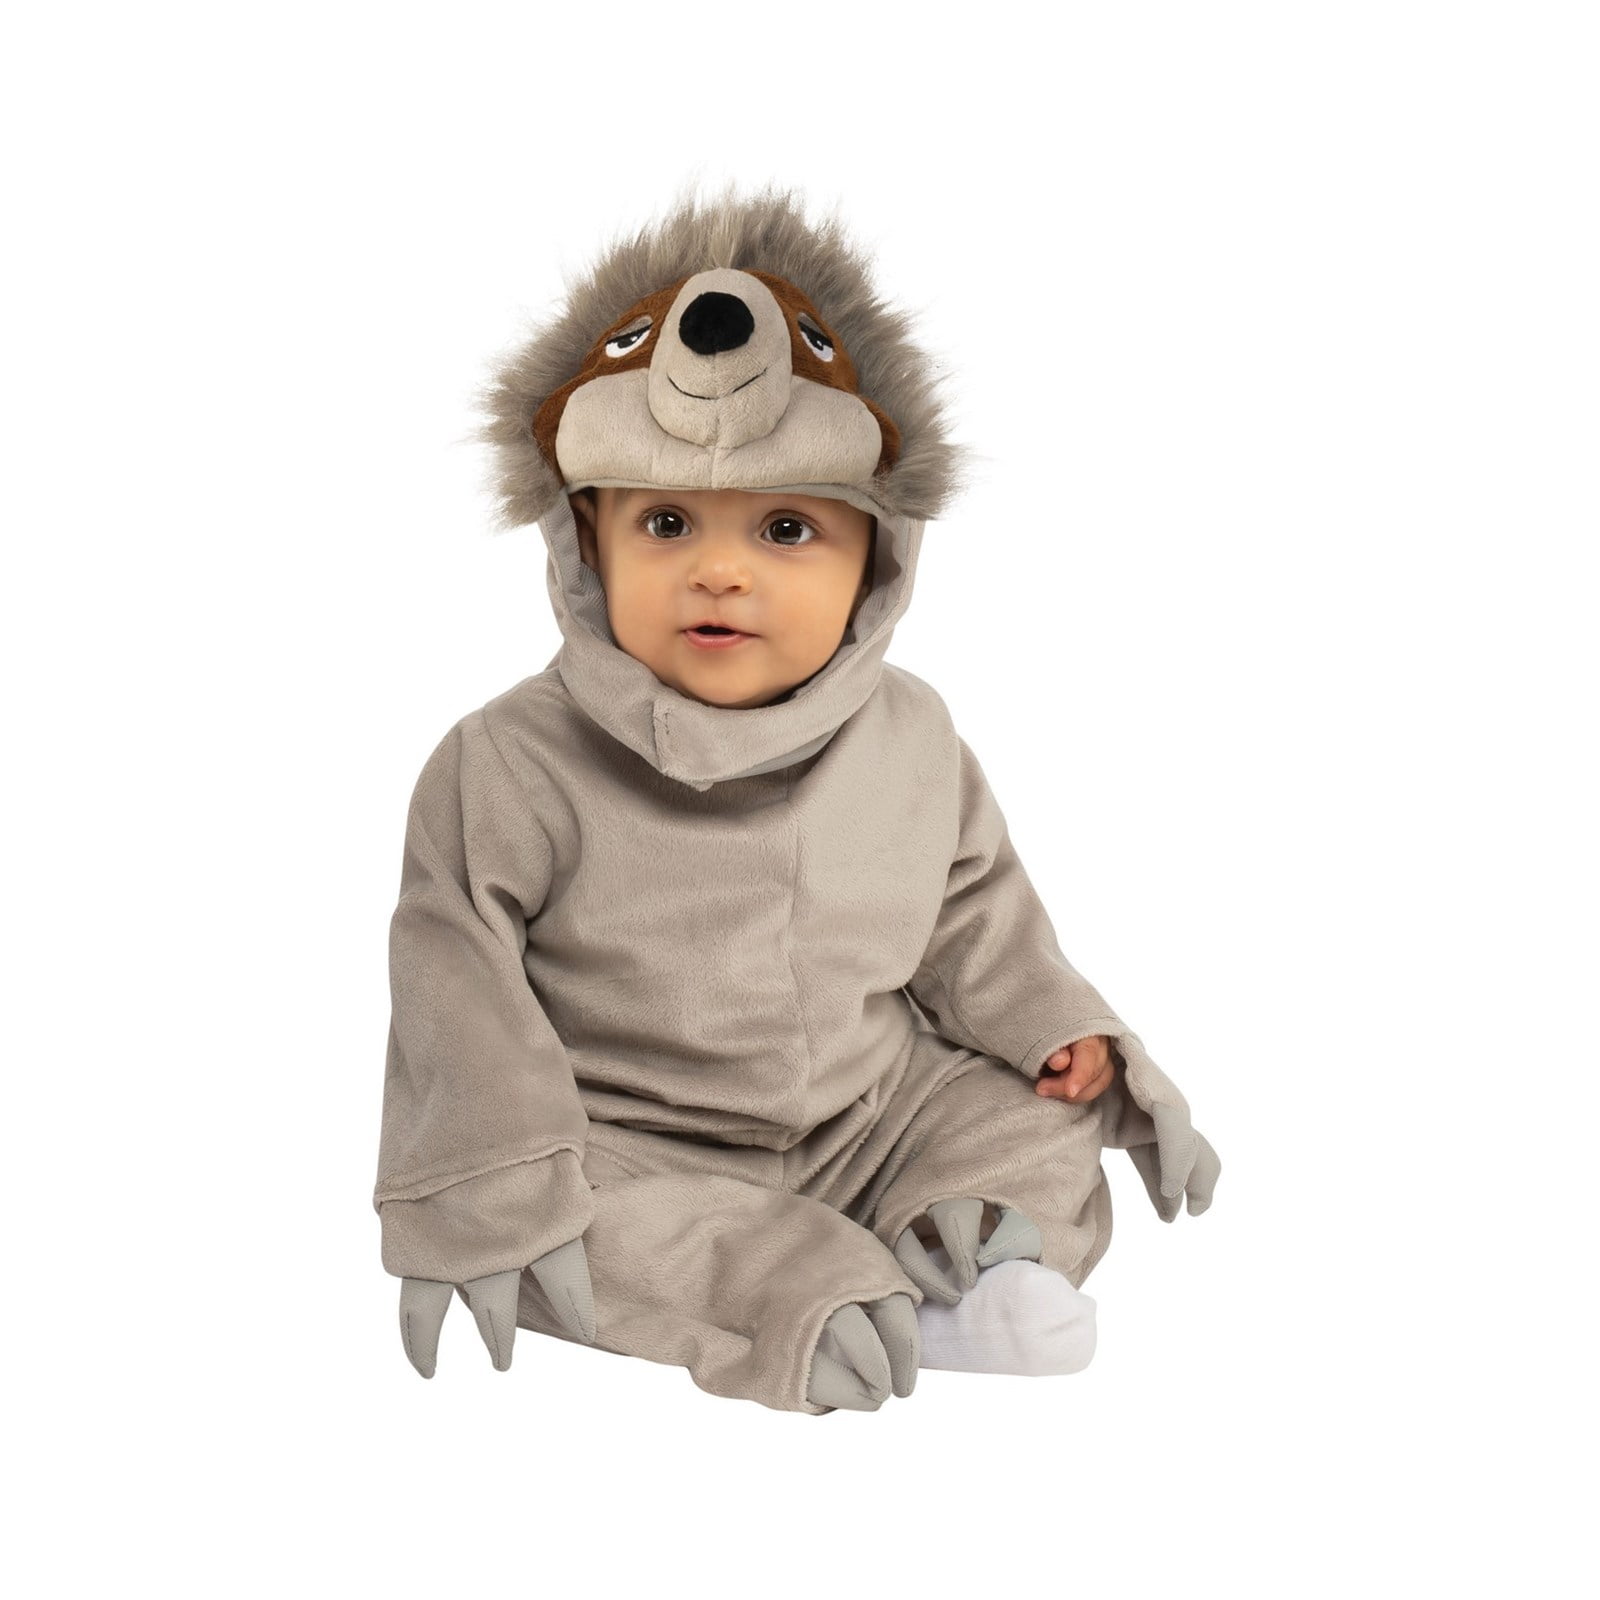 Picture of Rubies 405623 Sloth Costume - Infant